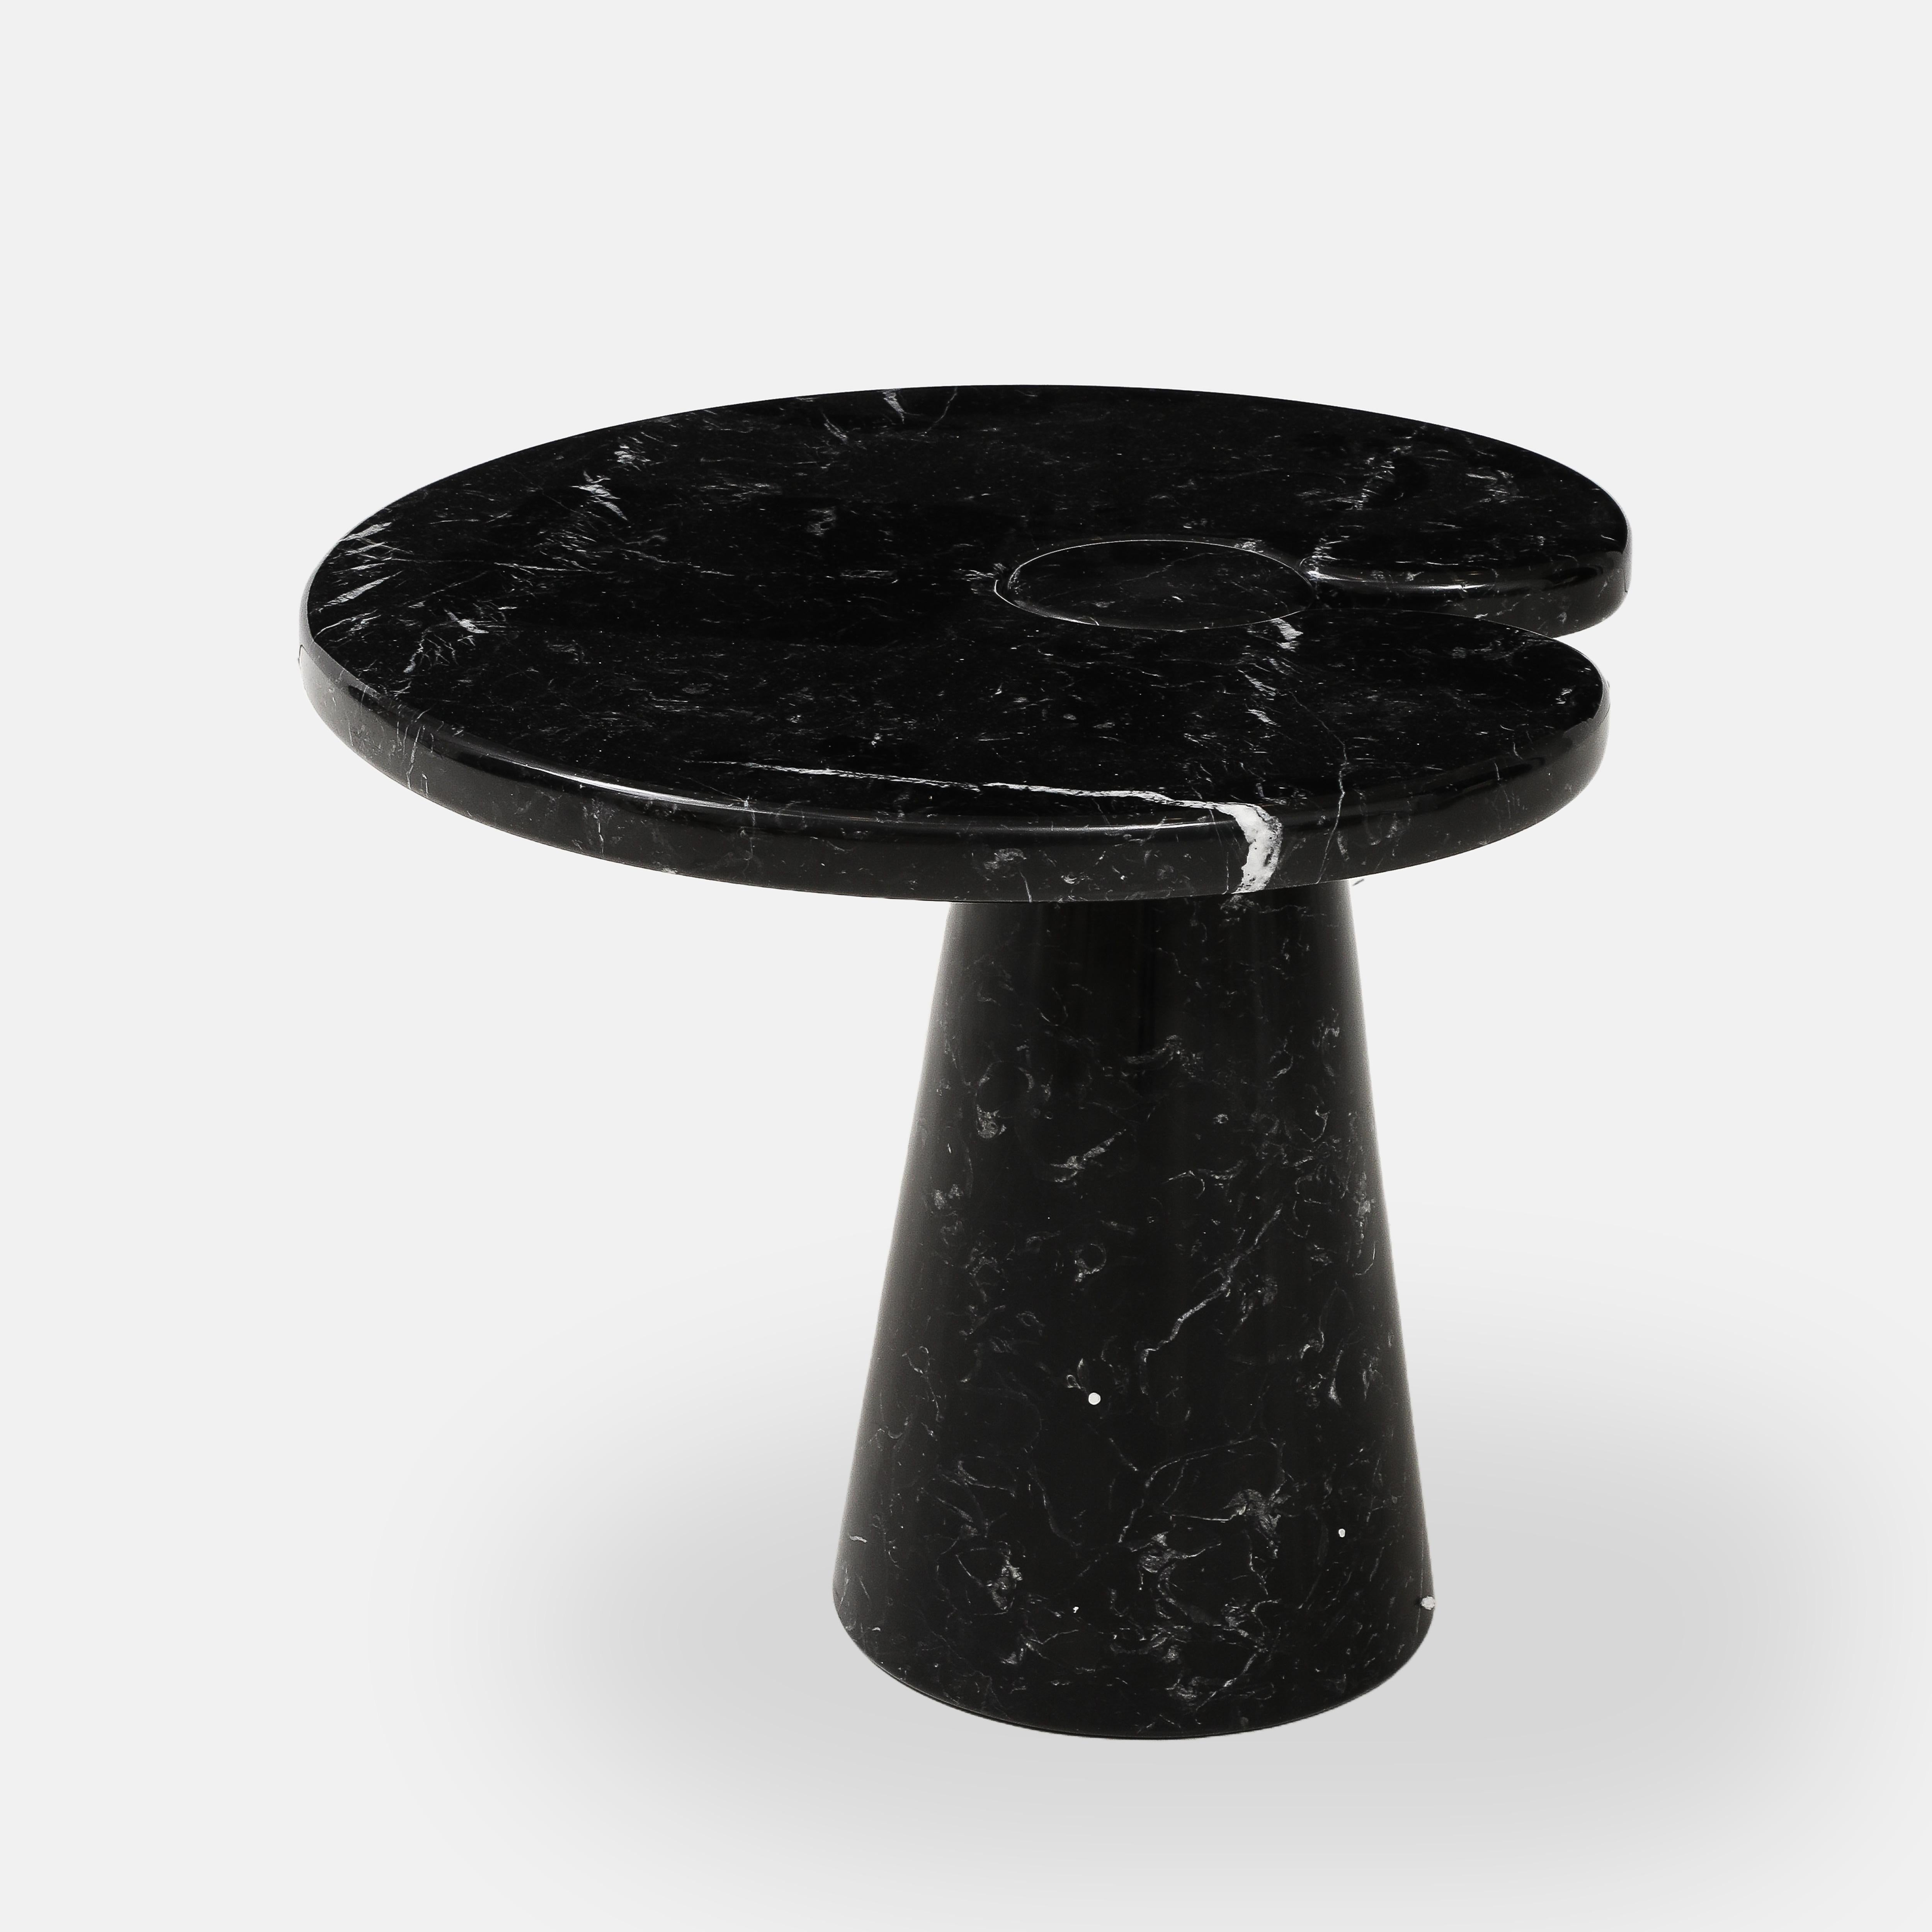 Carrara Marble Angelo Mangiarotti Nero Marquina Marble Side Table from 'Eros' Series, 1971 For Sale